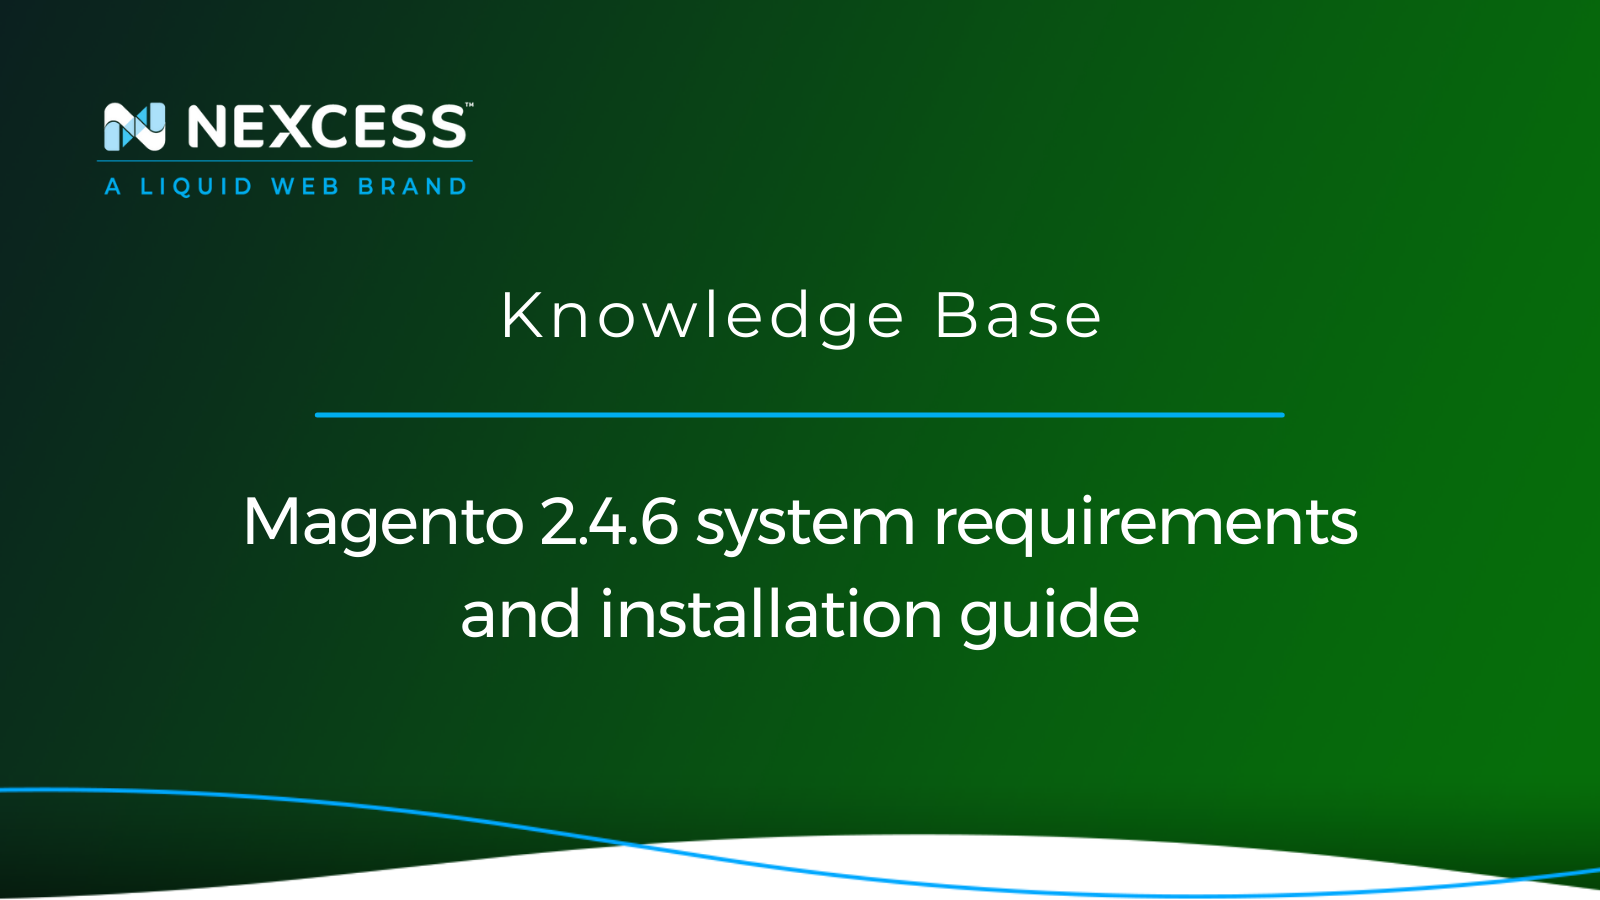 Magento 2.4.6 system requirements and installation guide